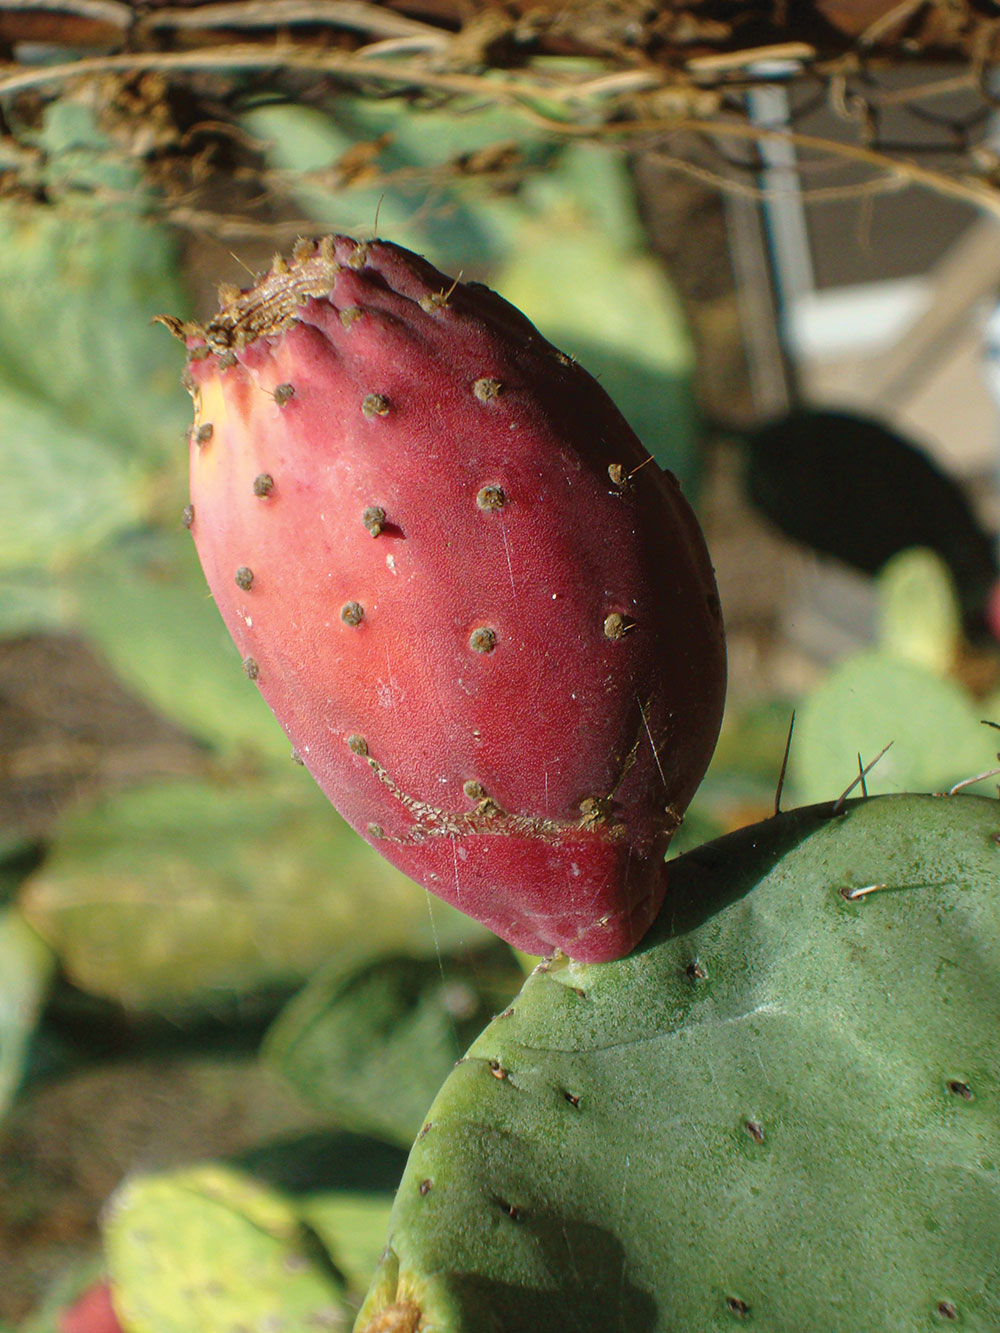 The sweet fruit of the prickly pear cactus matures around September.